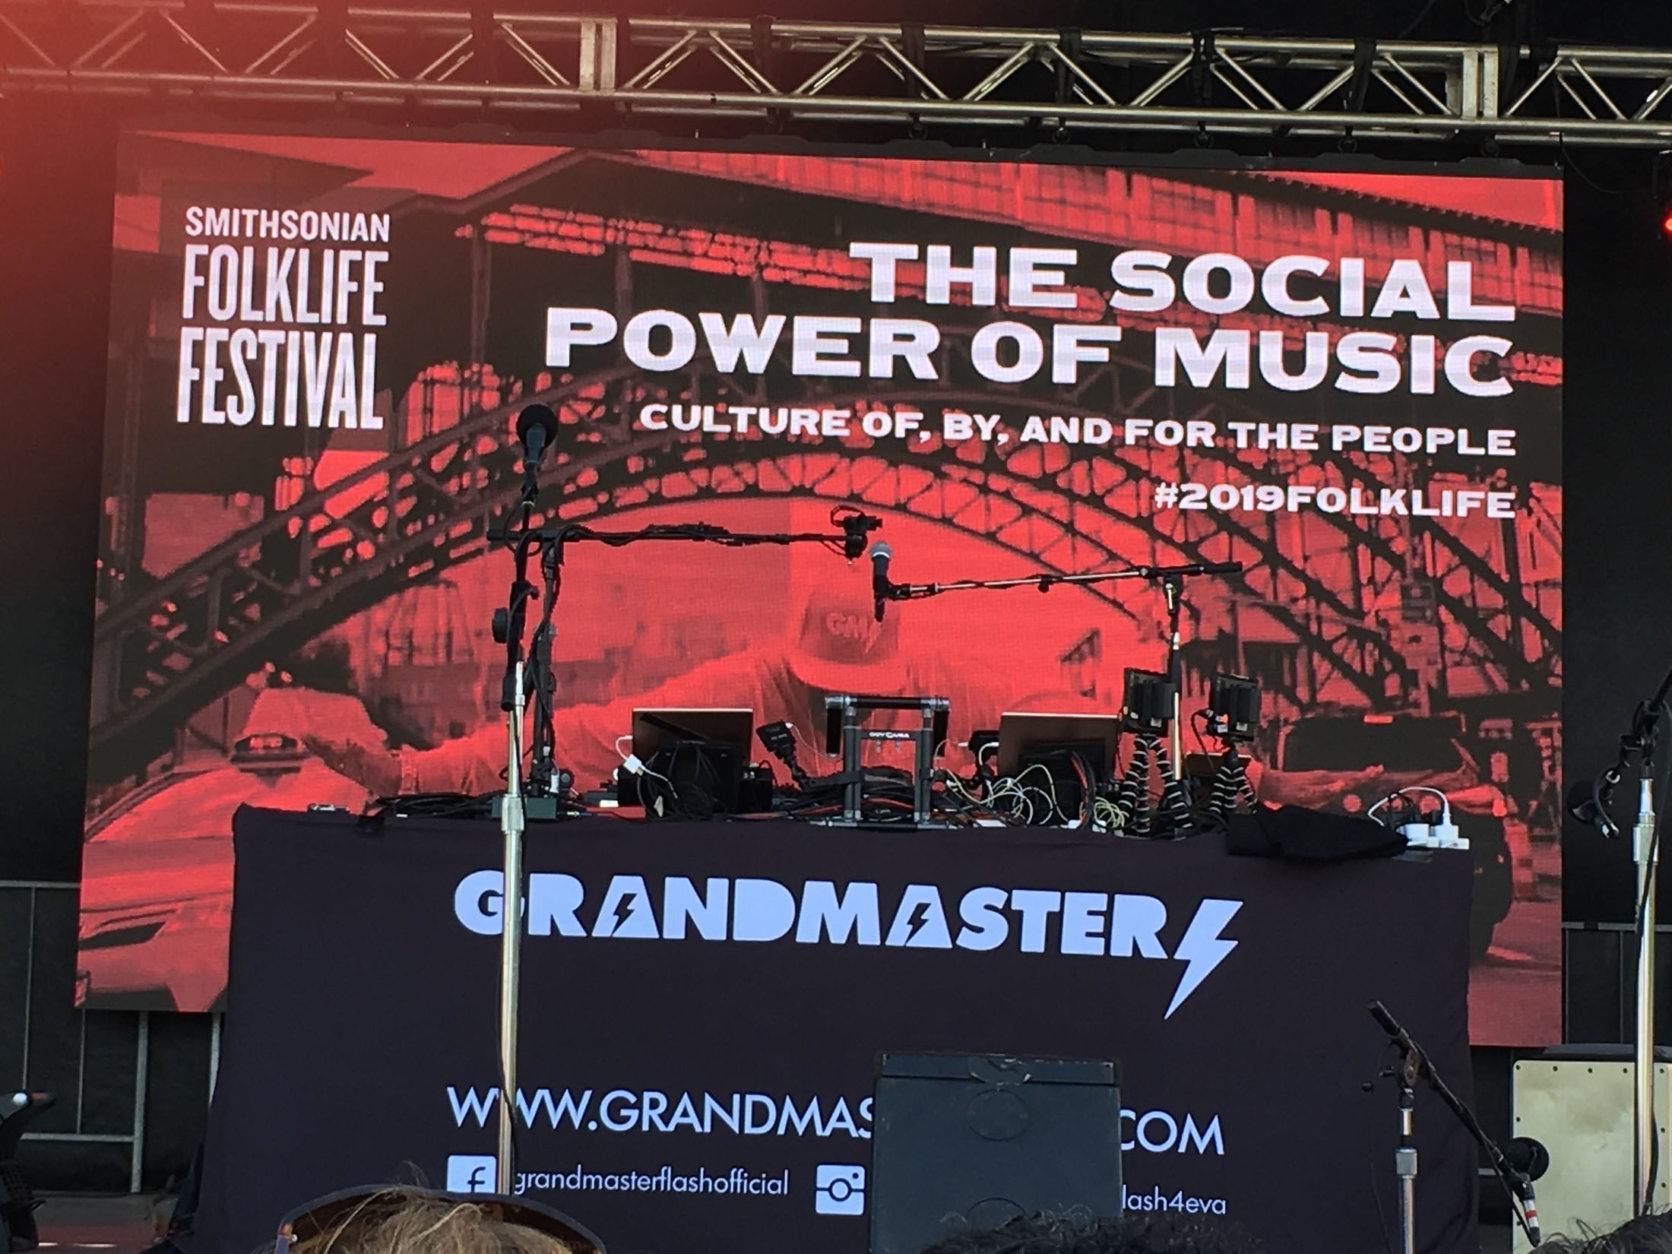 Grandmaster Flash was scheduled to close the Smithsonian Folklife Festival. (WTOP/Liz Anderson)